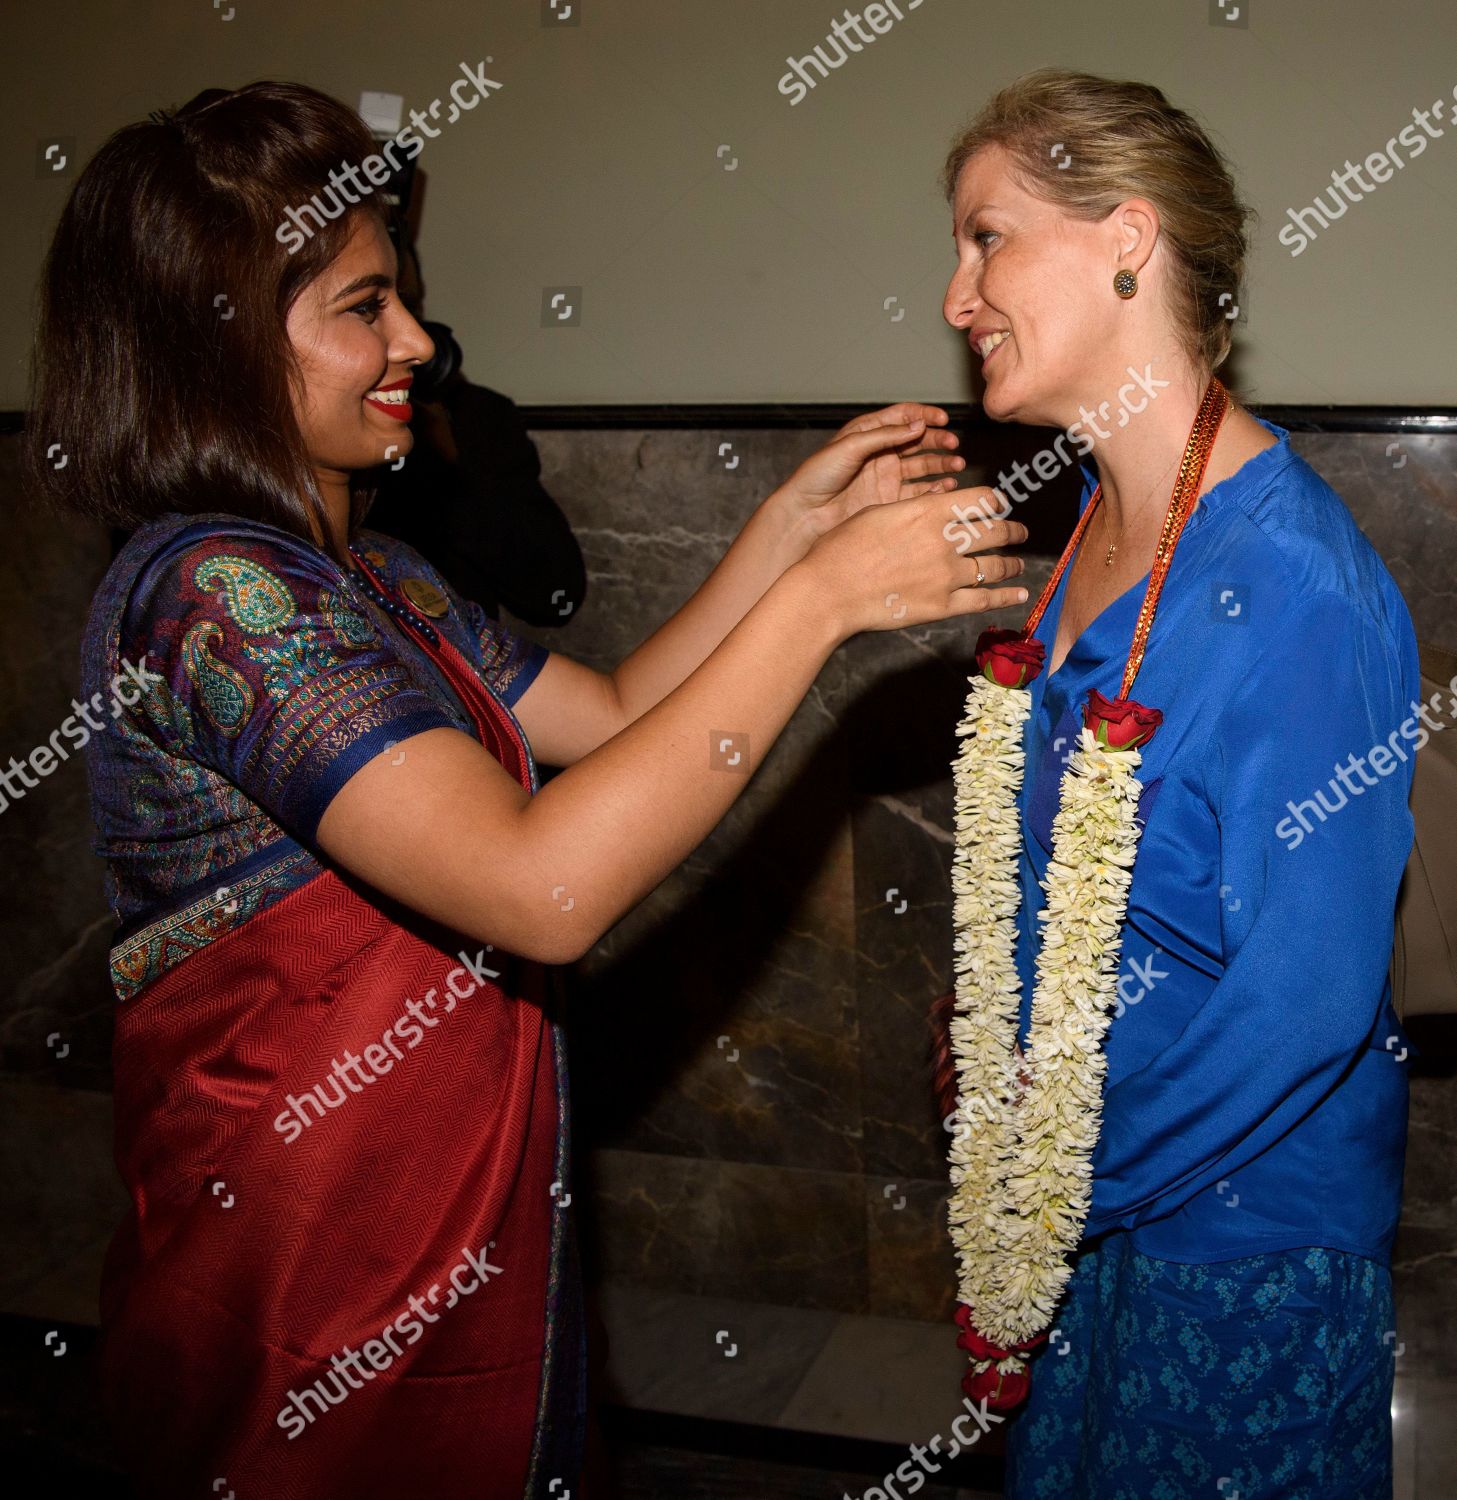 sophie-countess-of-wessex-visit-to-india-shutterstock-editorial-10222586bo.jpg